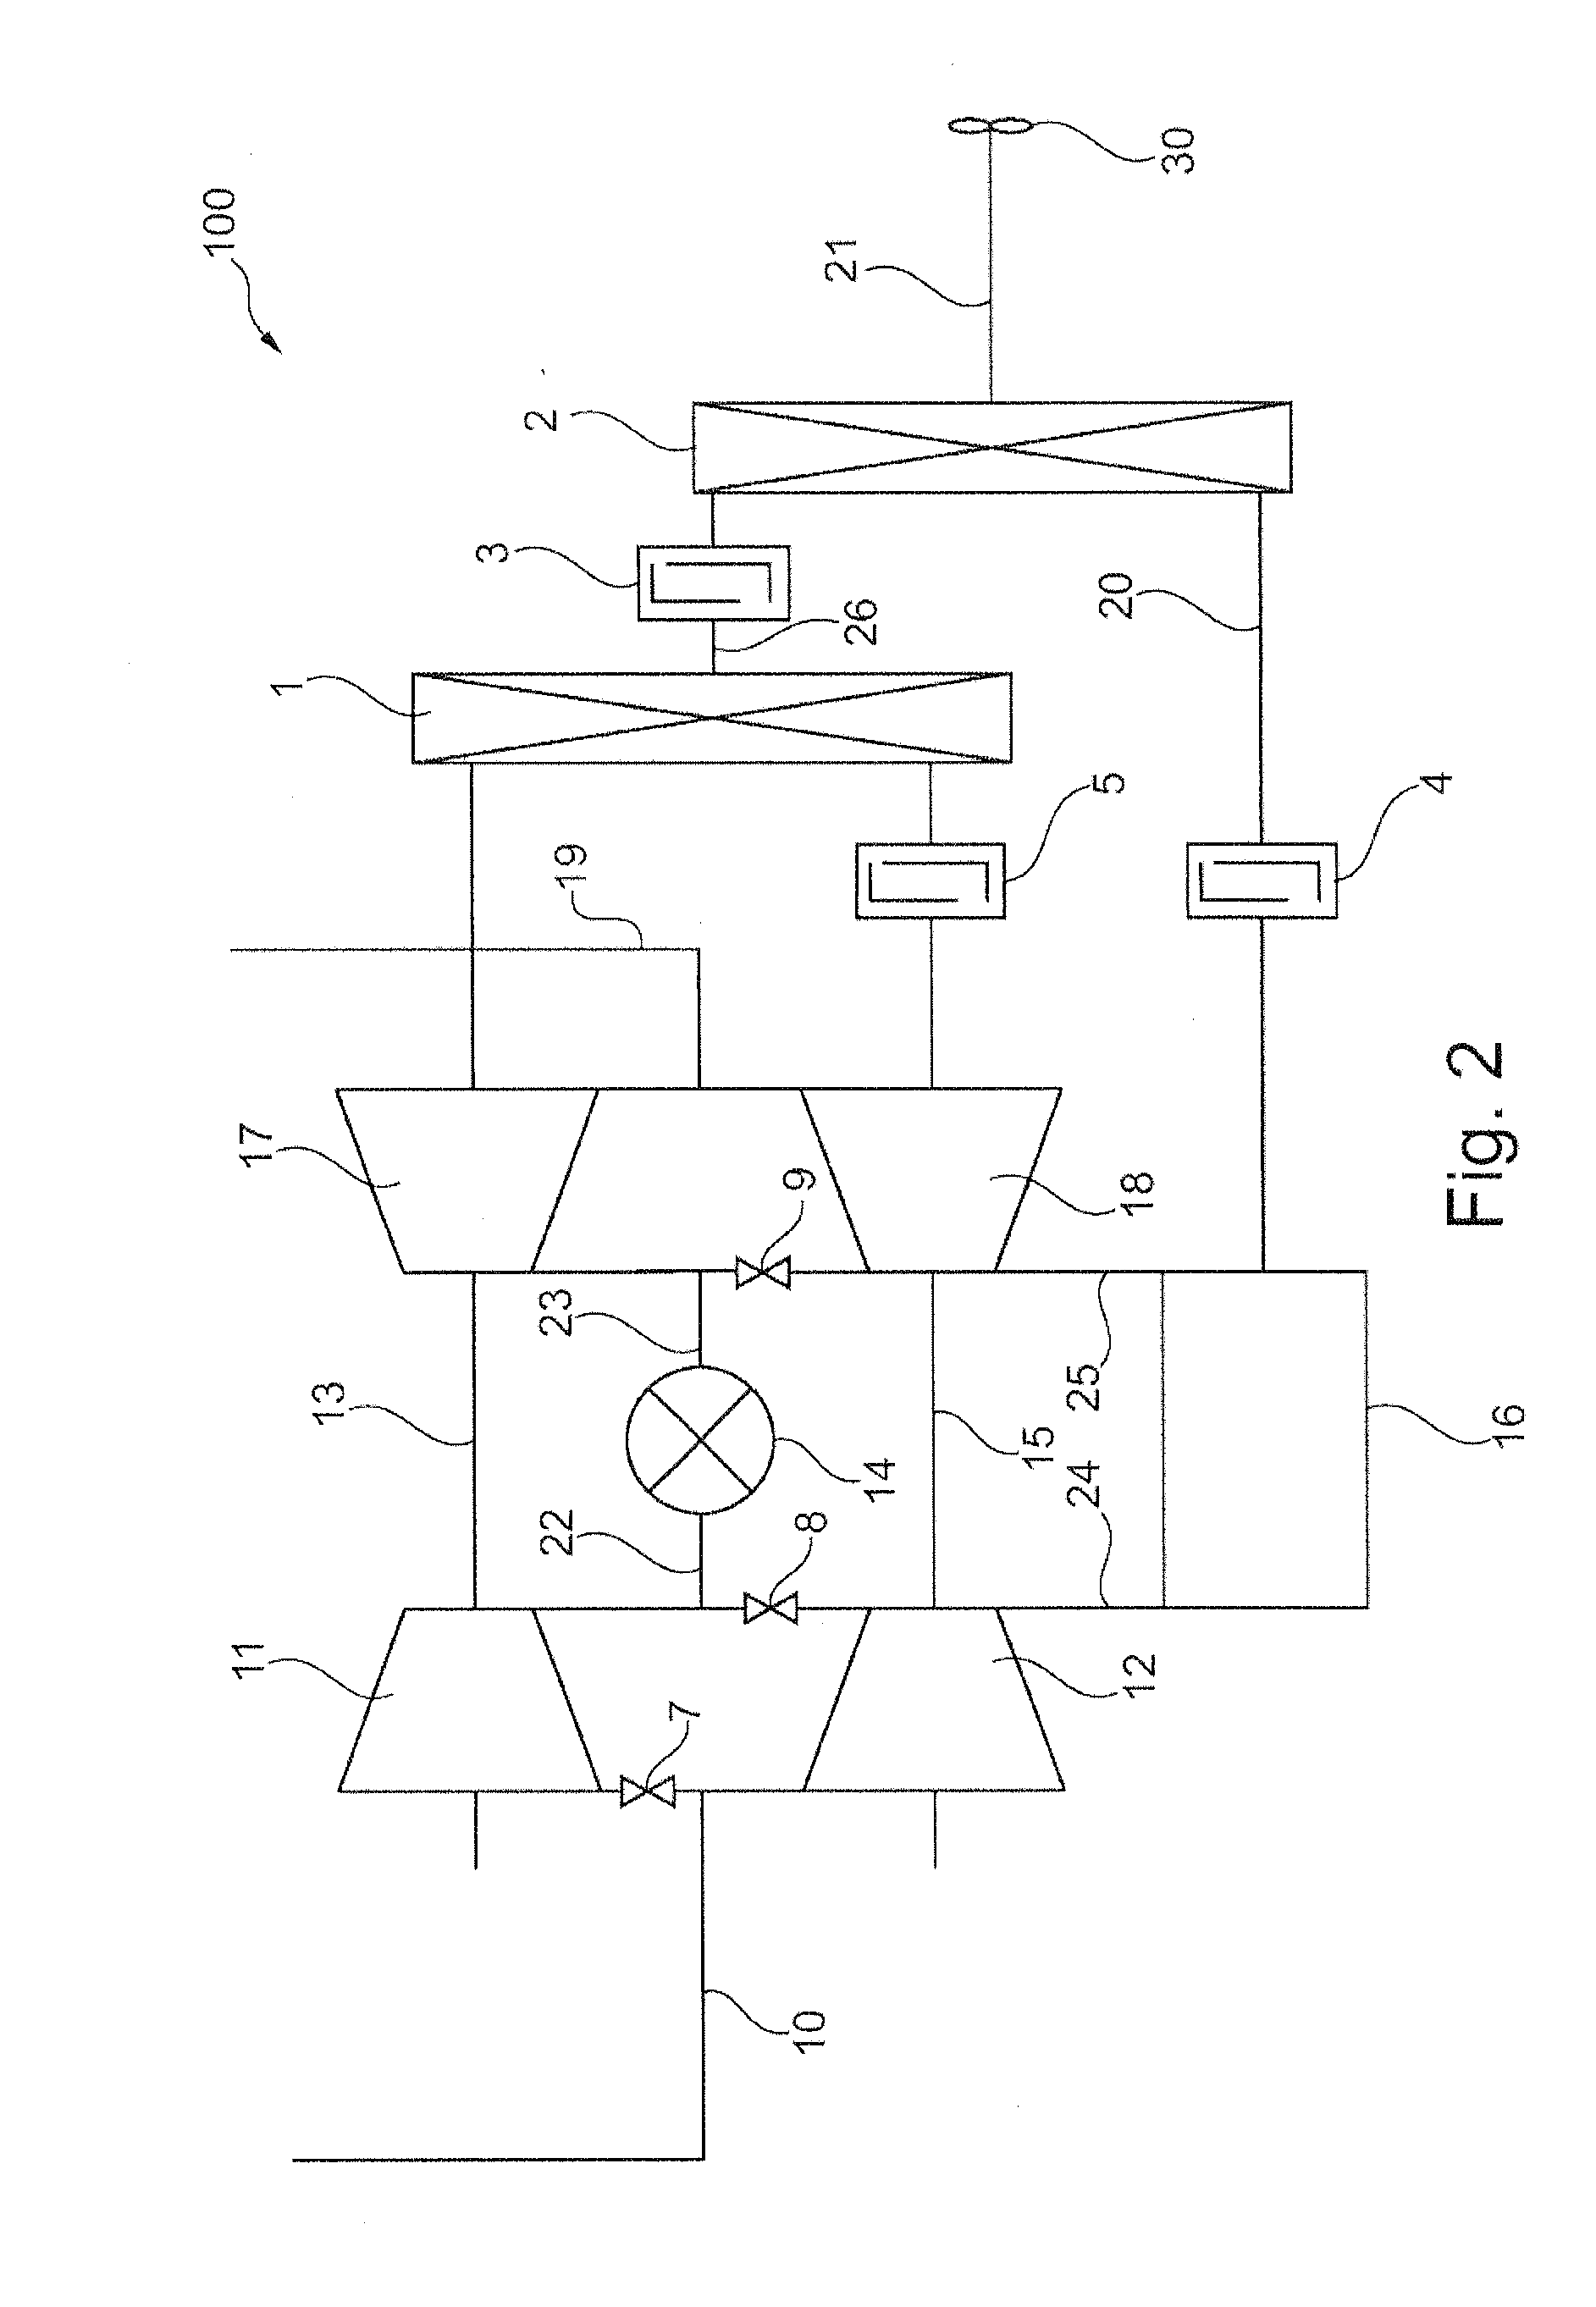 Diesel engine/gas turbine compound engine for a means of transport